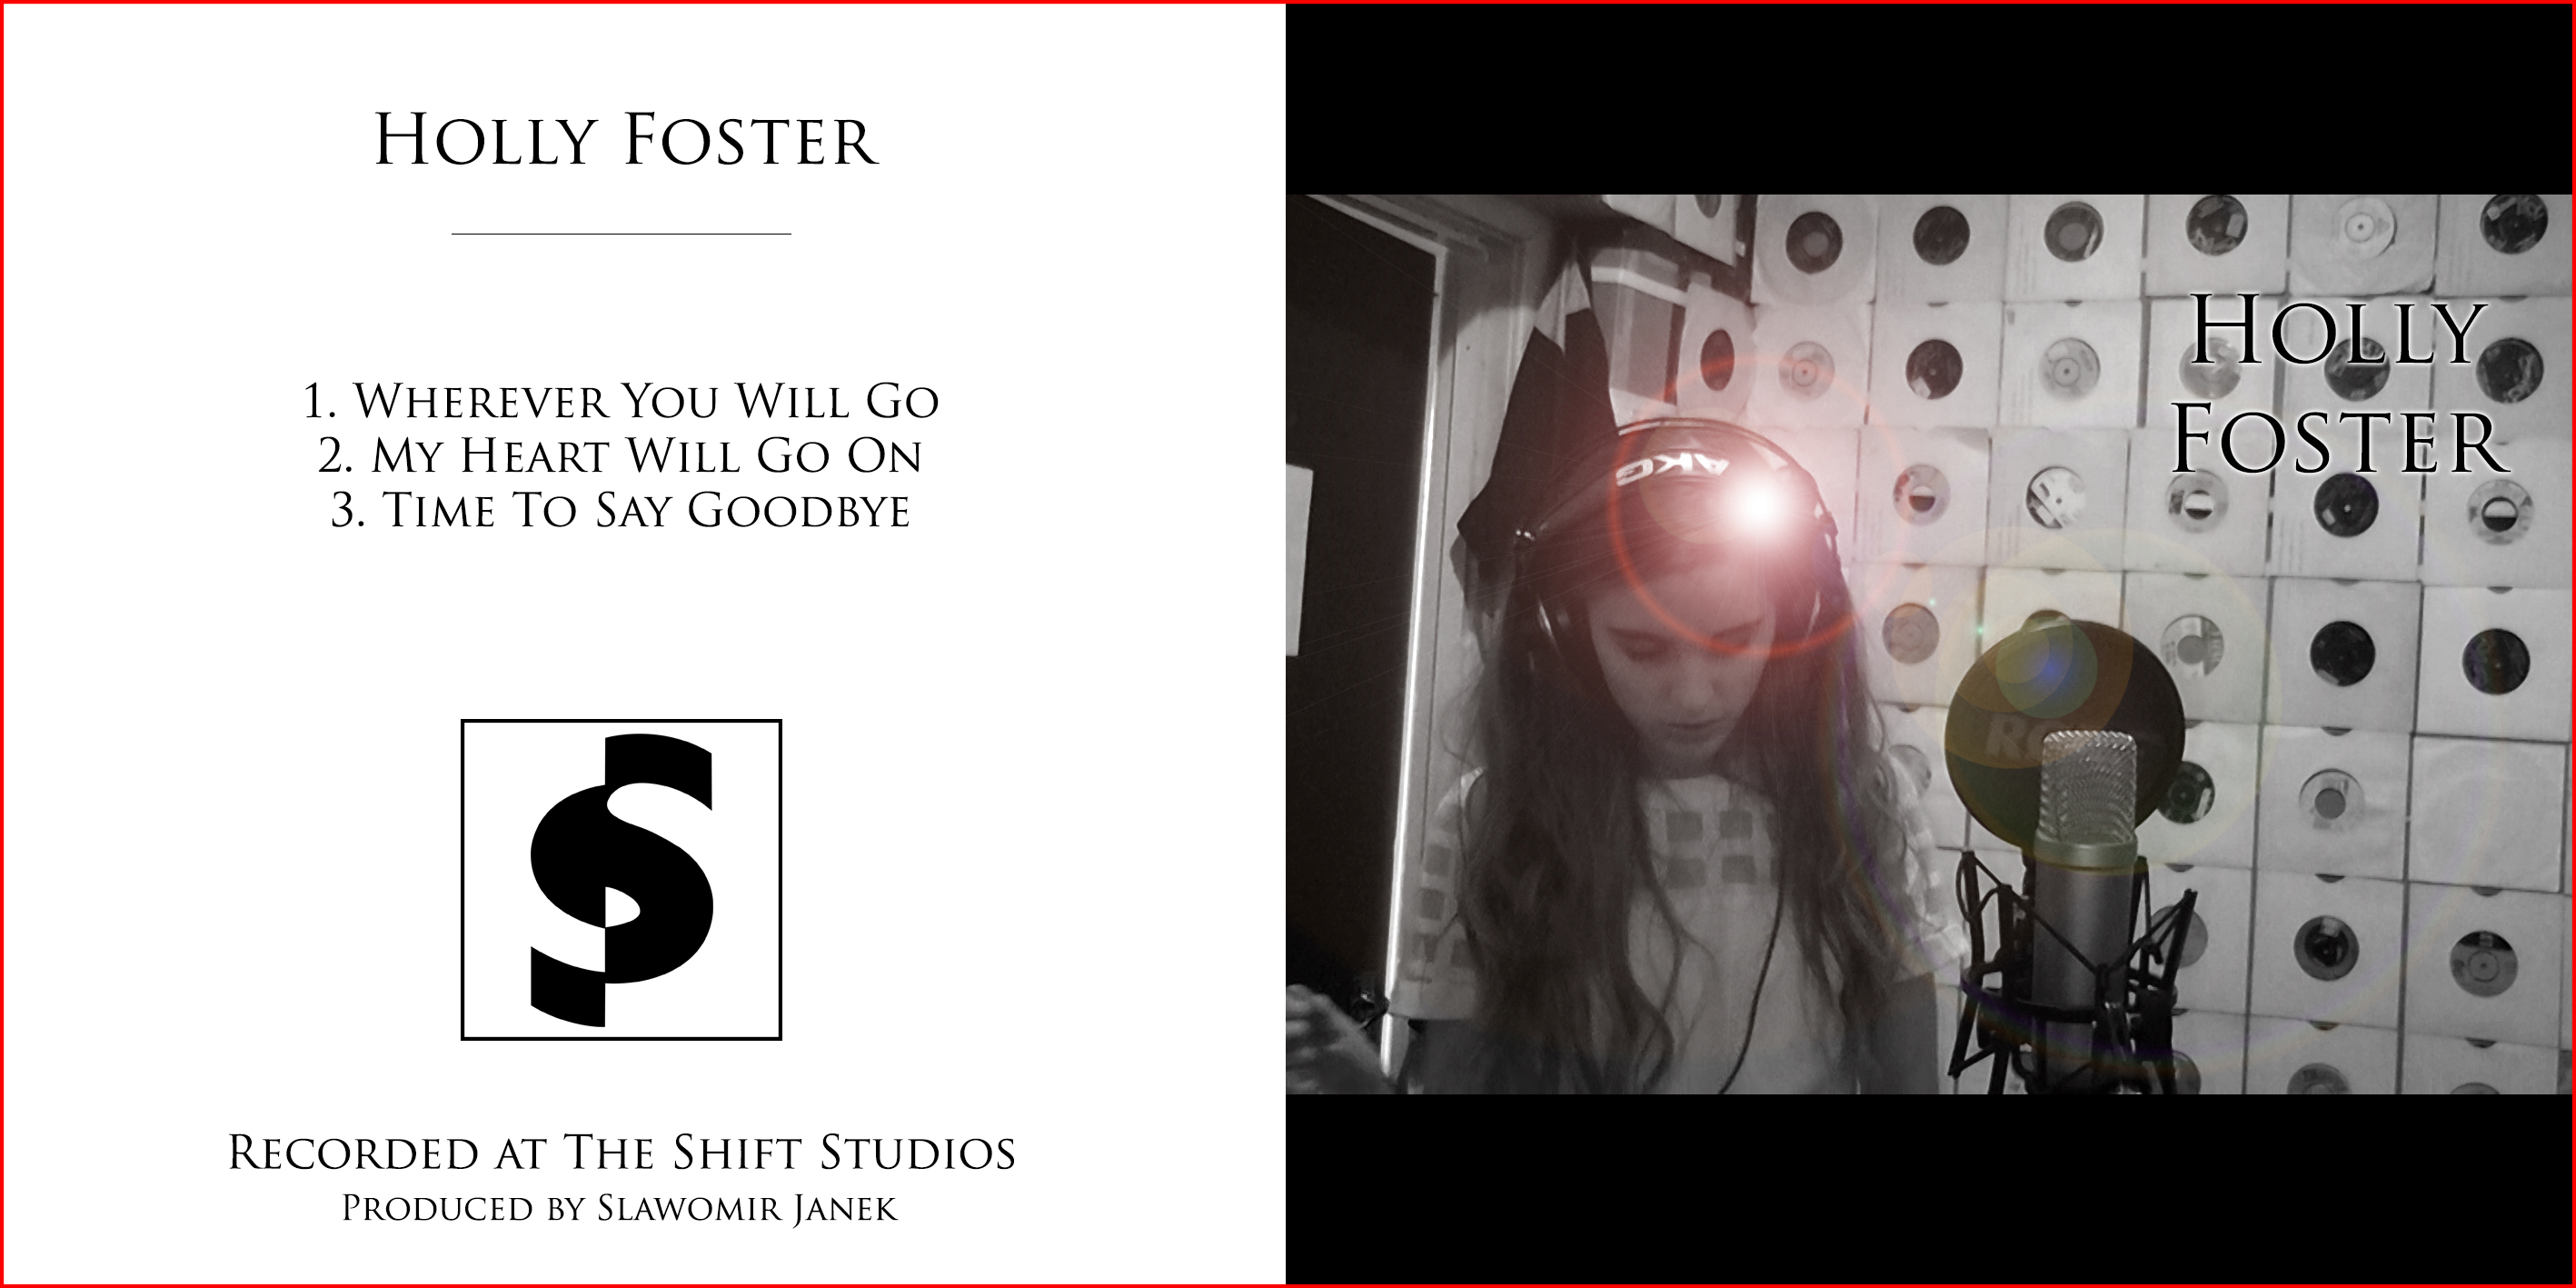 the-shift-studios-holly-foster-recorded-in-burnley-lancashire